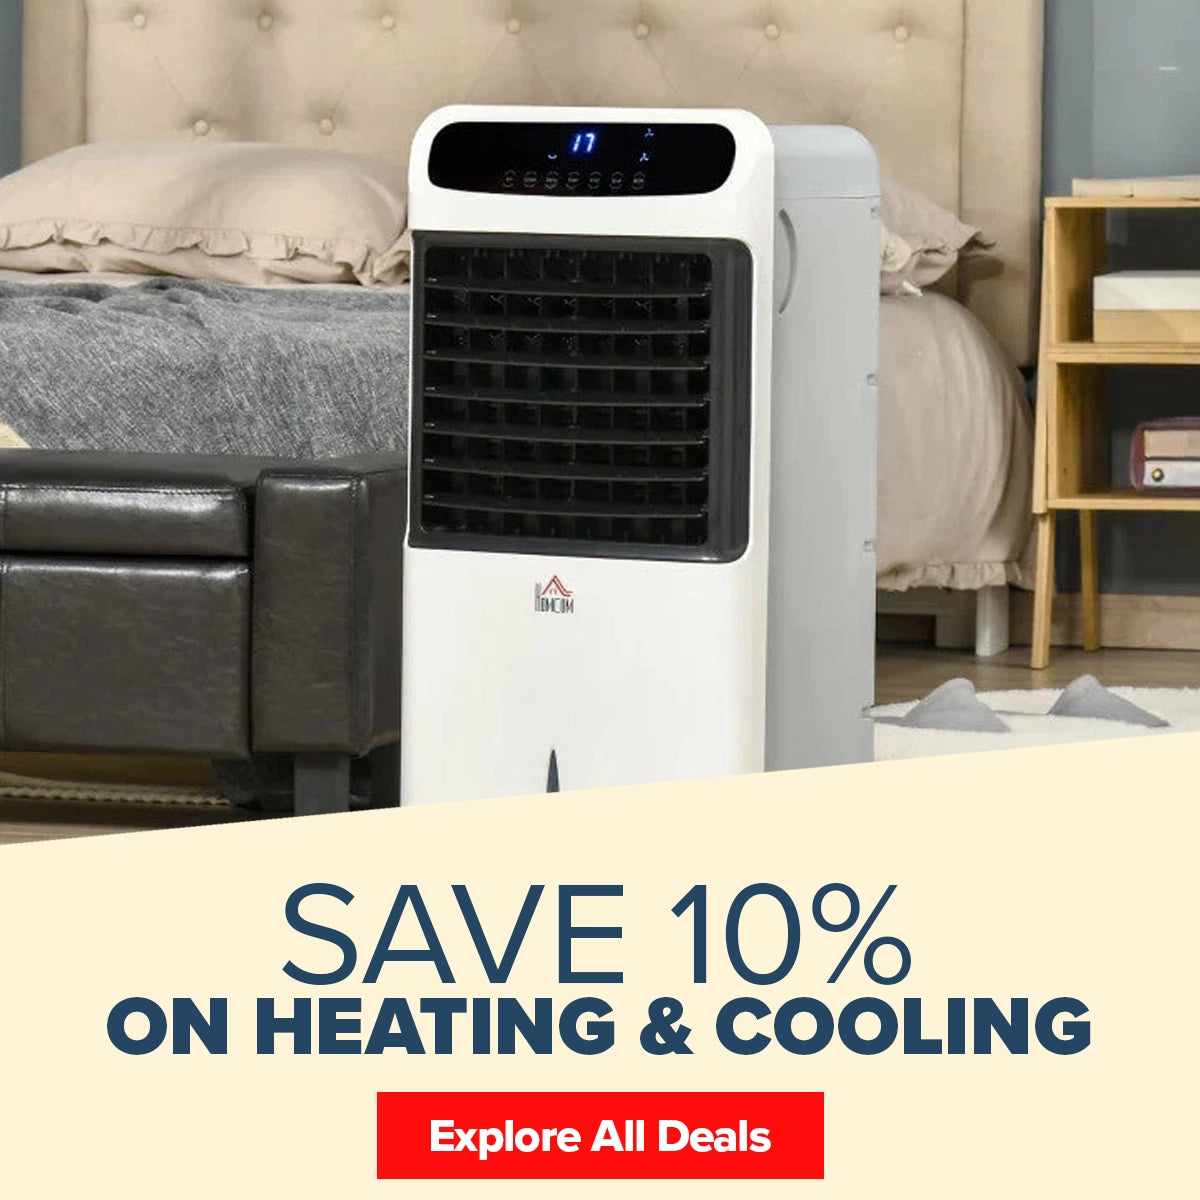 Save 10% on heating and cooling